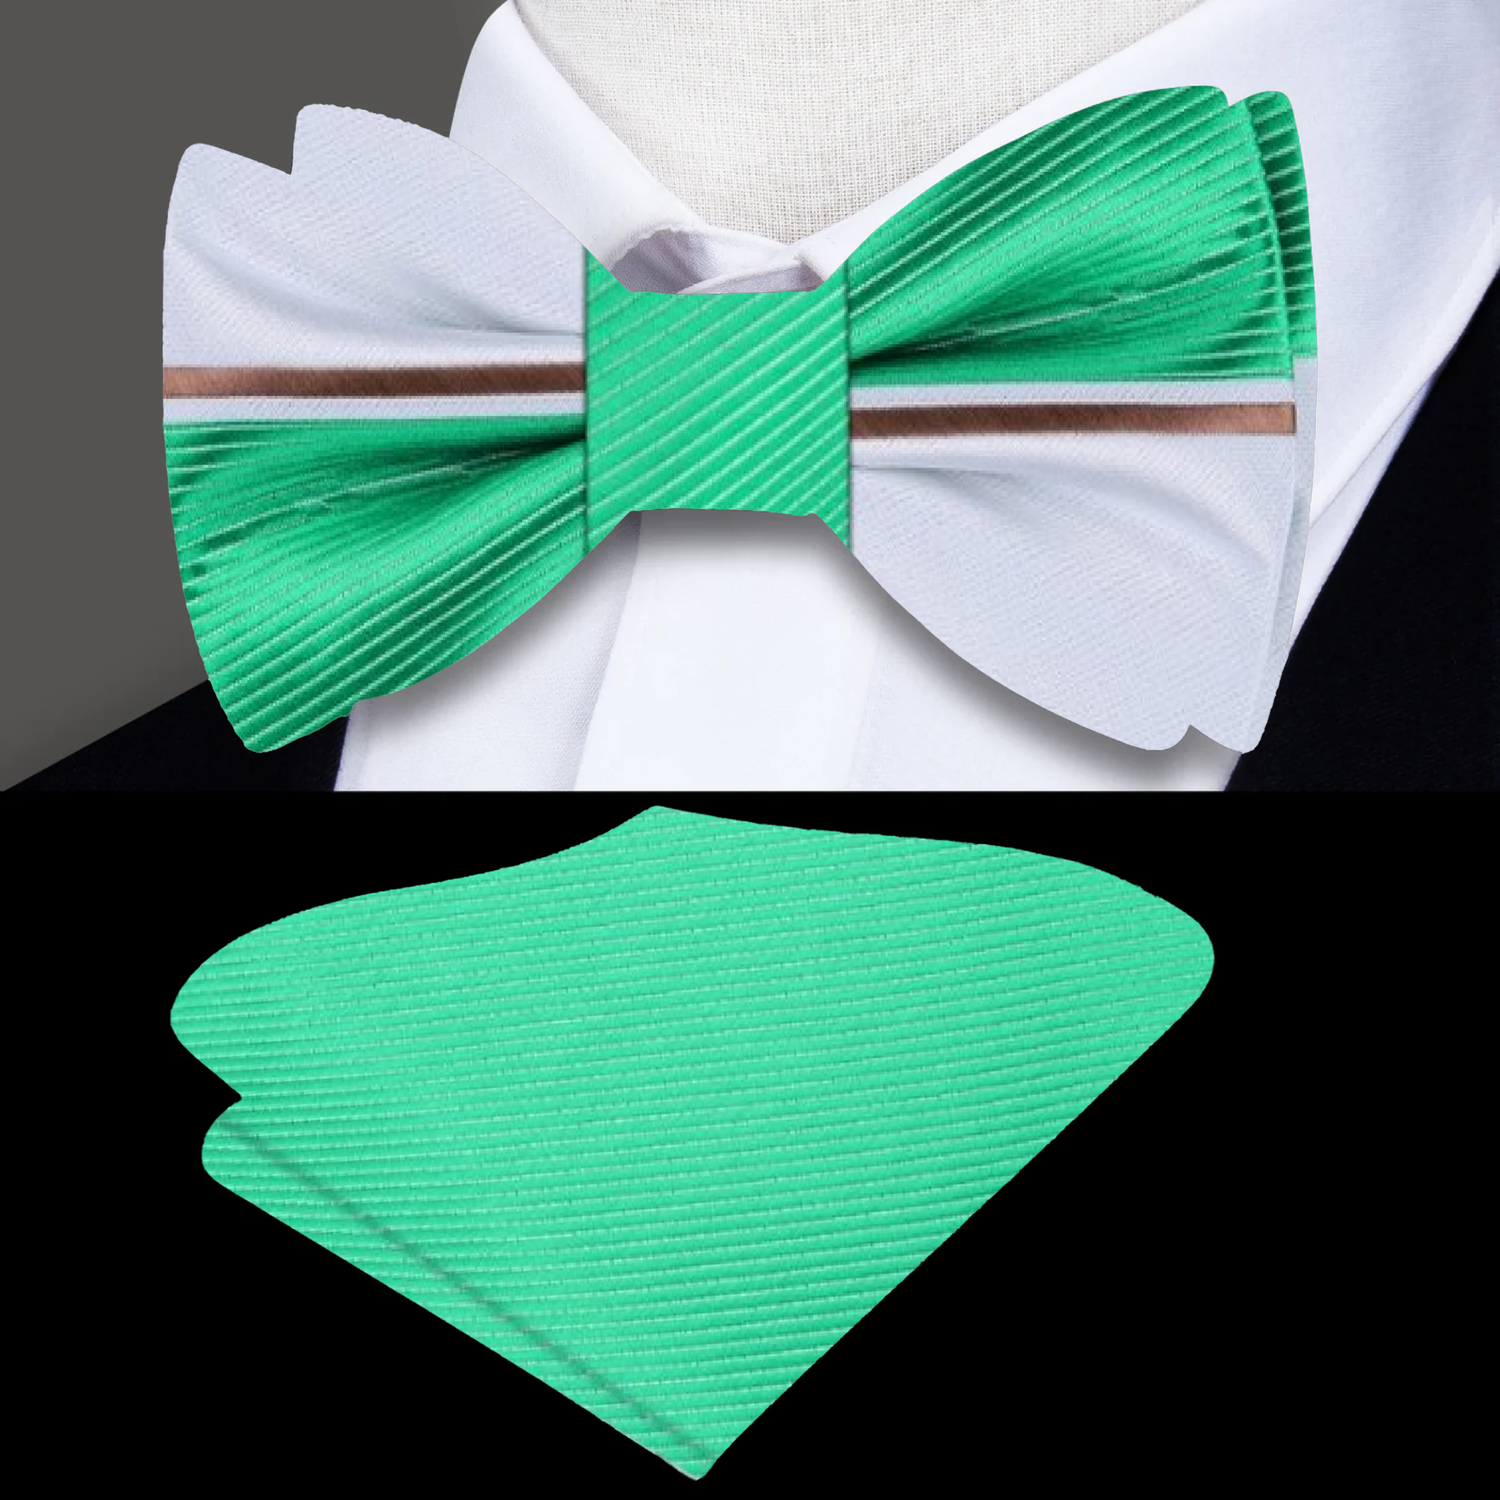 Light Grey, Light Green Lined Bow Tie and Pocket Square||Light Silver, Light Green